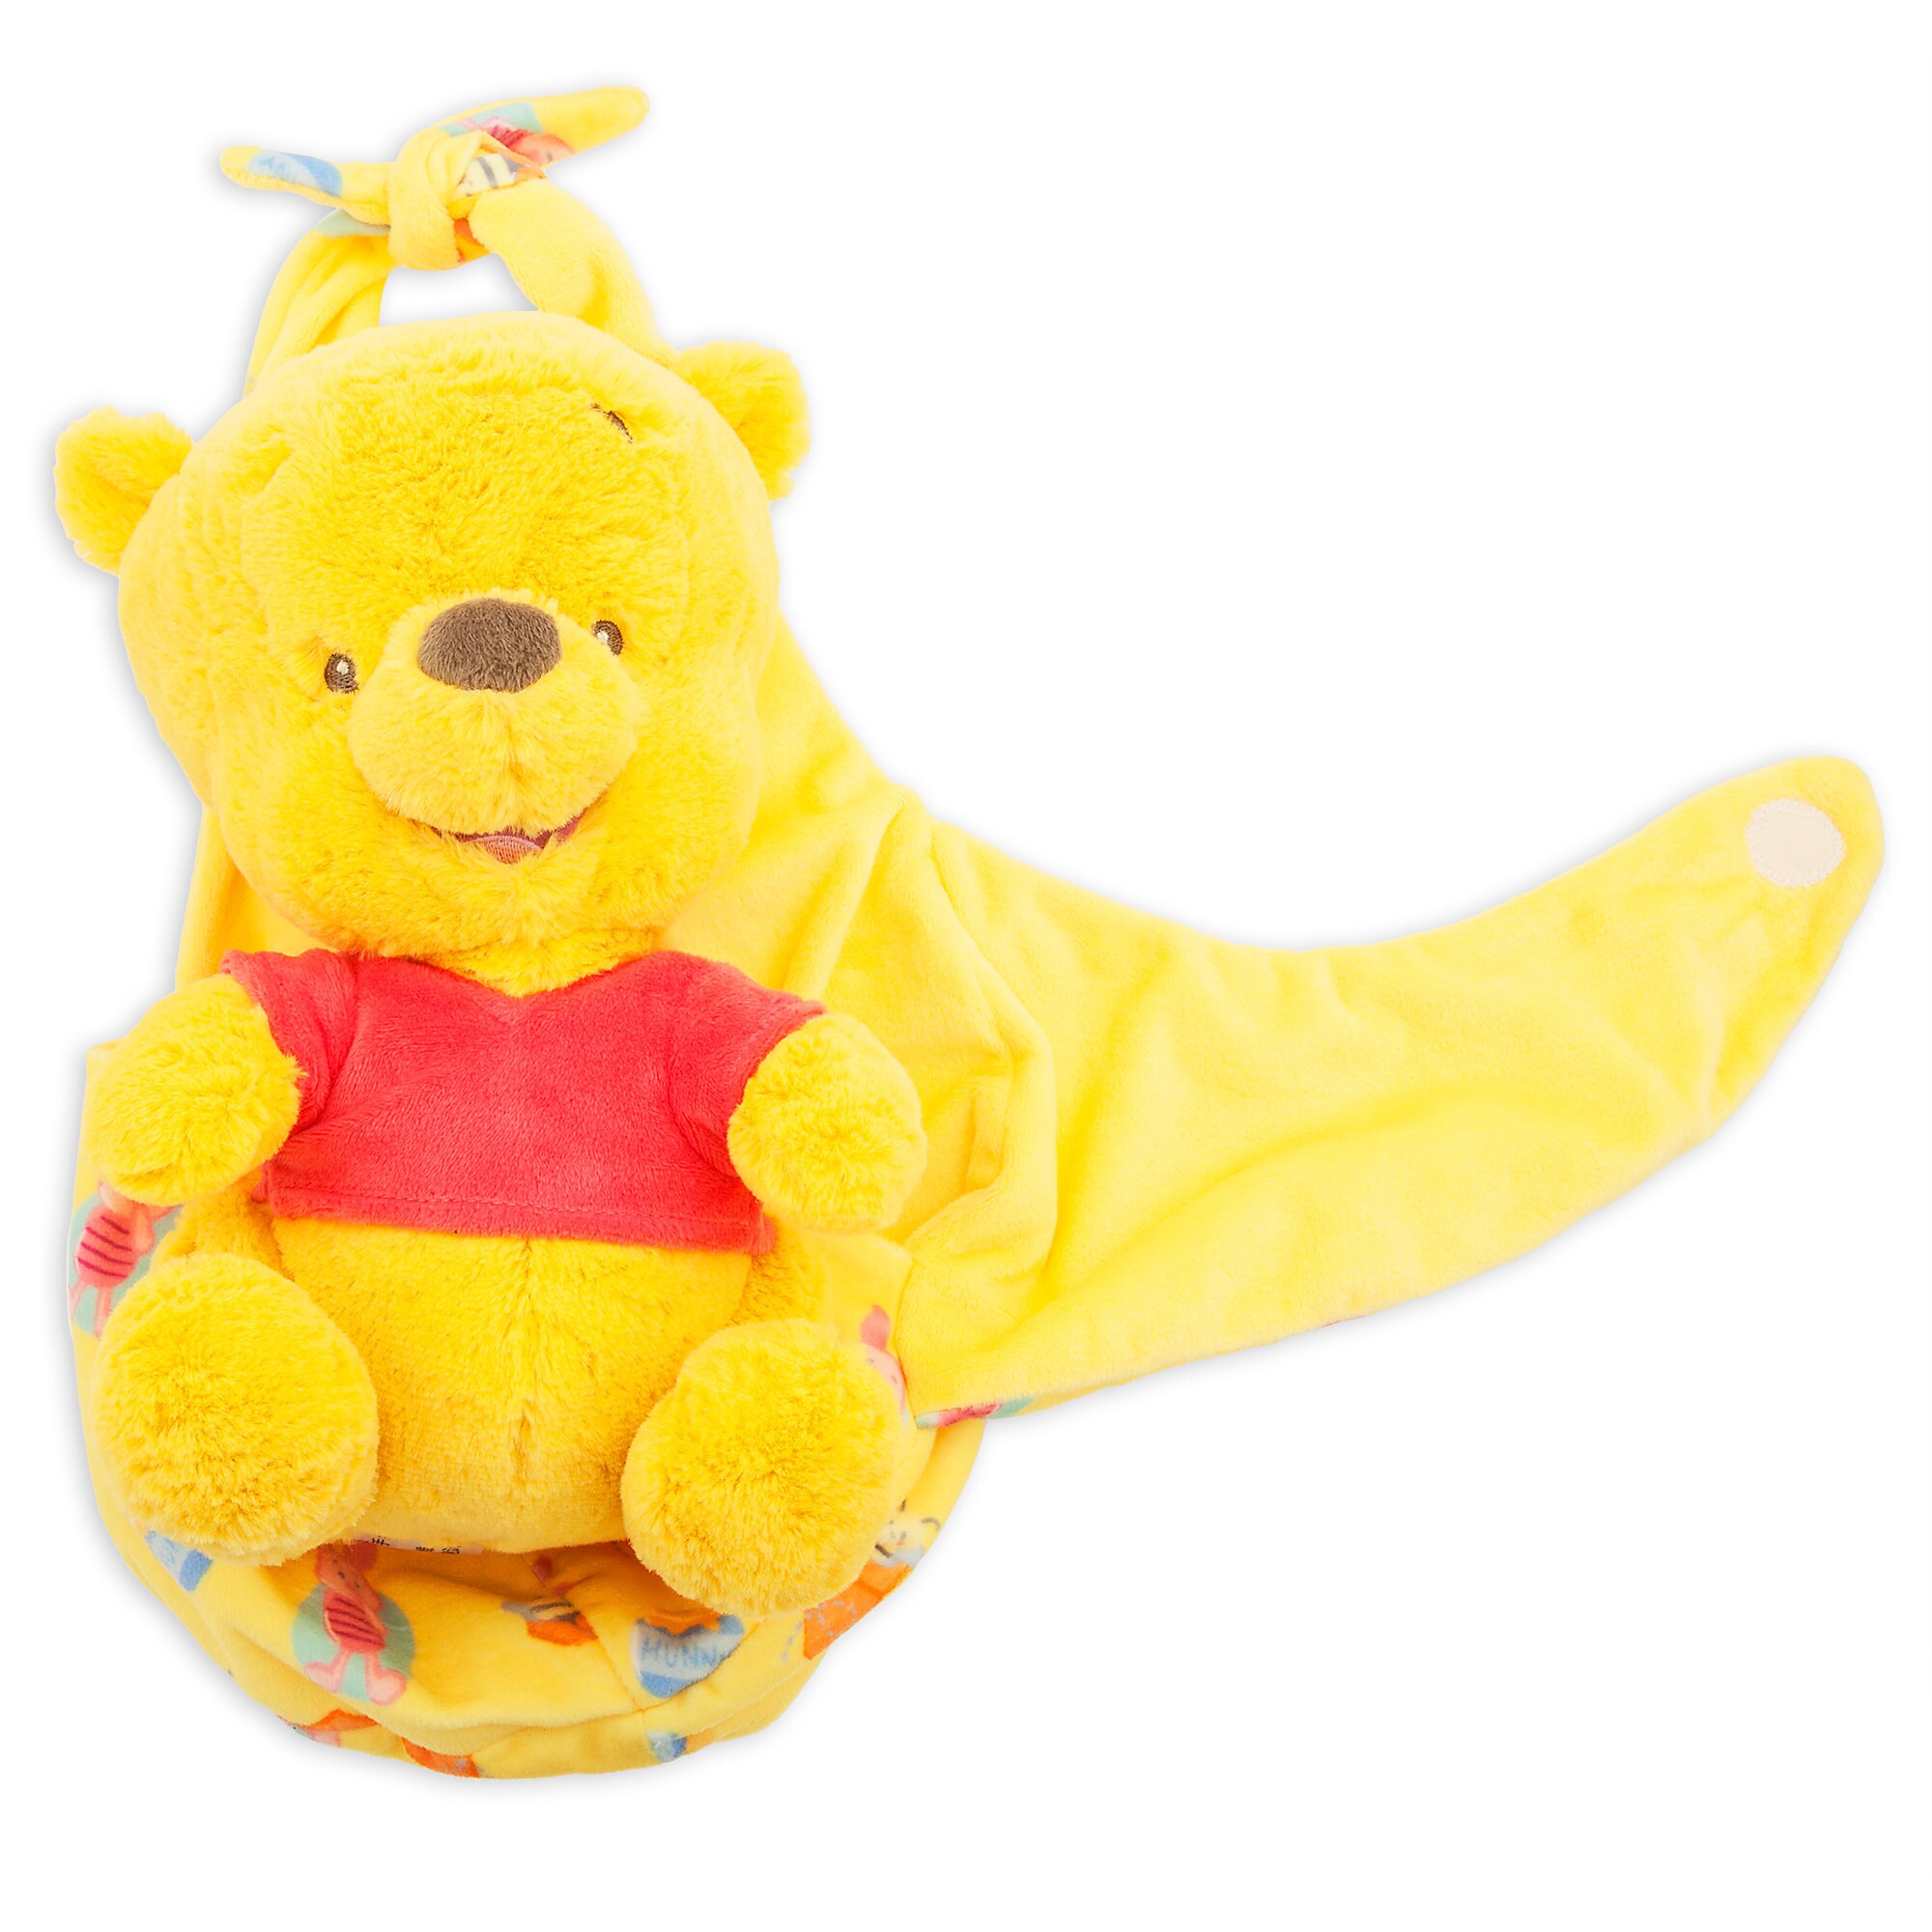 Winnie the Pooh Plush in Pouch - Disney Babies - Small